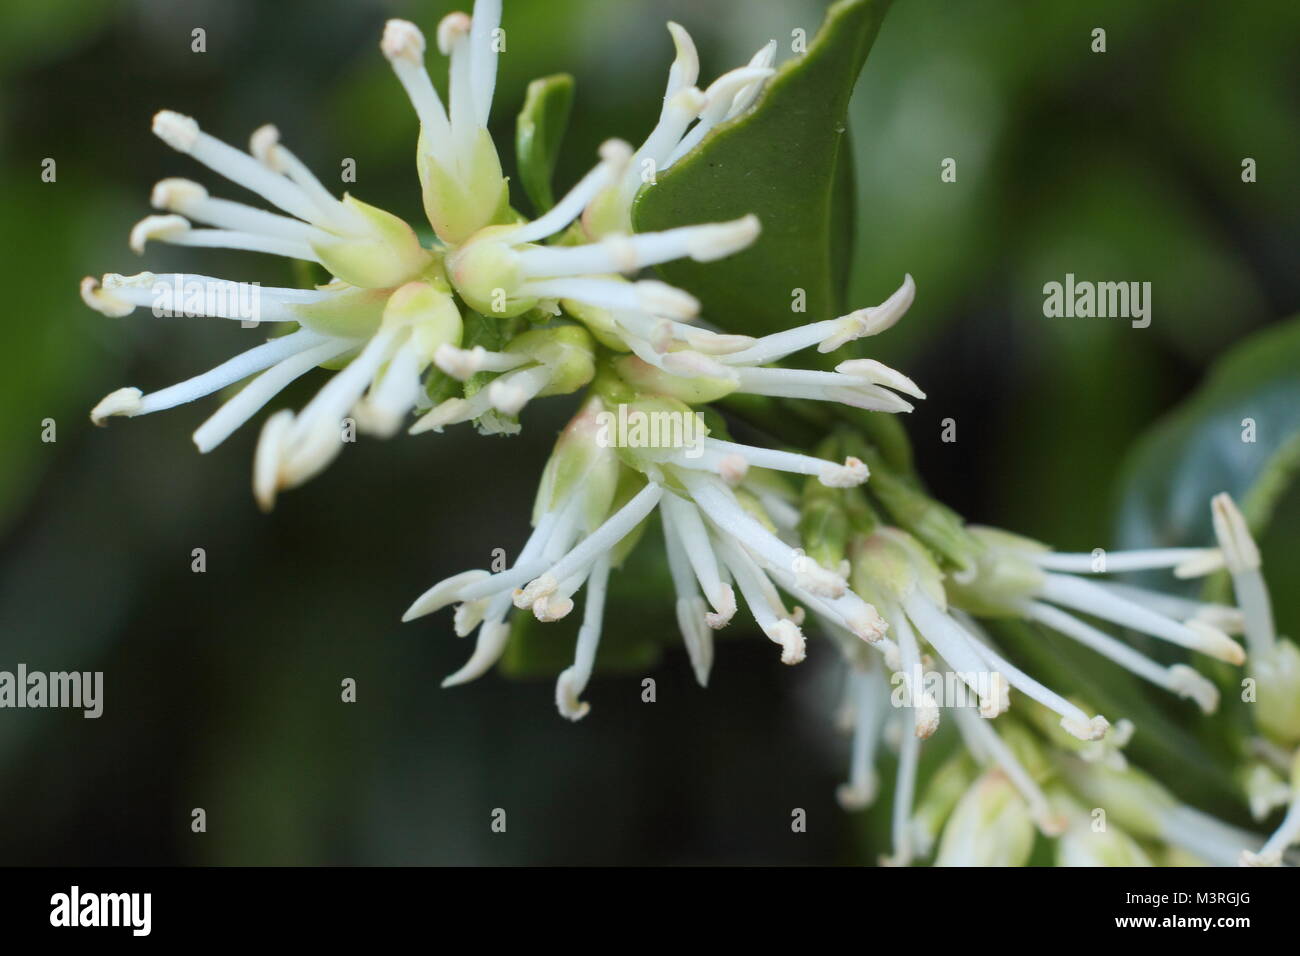 Sarcococca wallichii, also called Christmas box or Sweet box, in flower in a UK winter garden Stock Photo